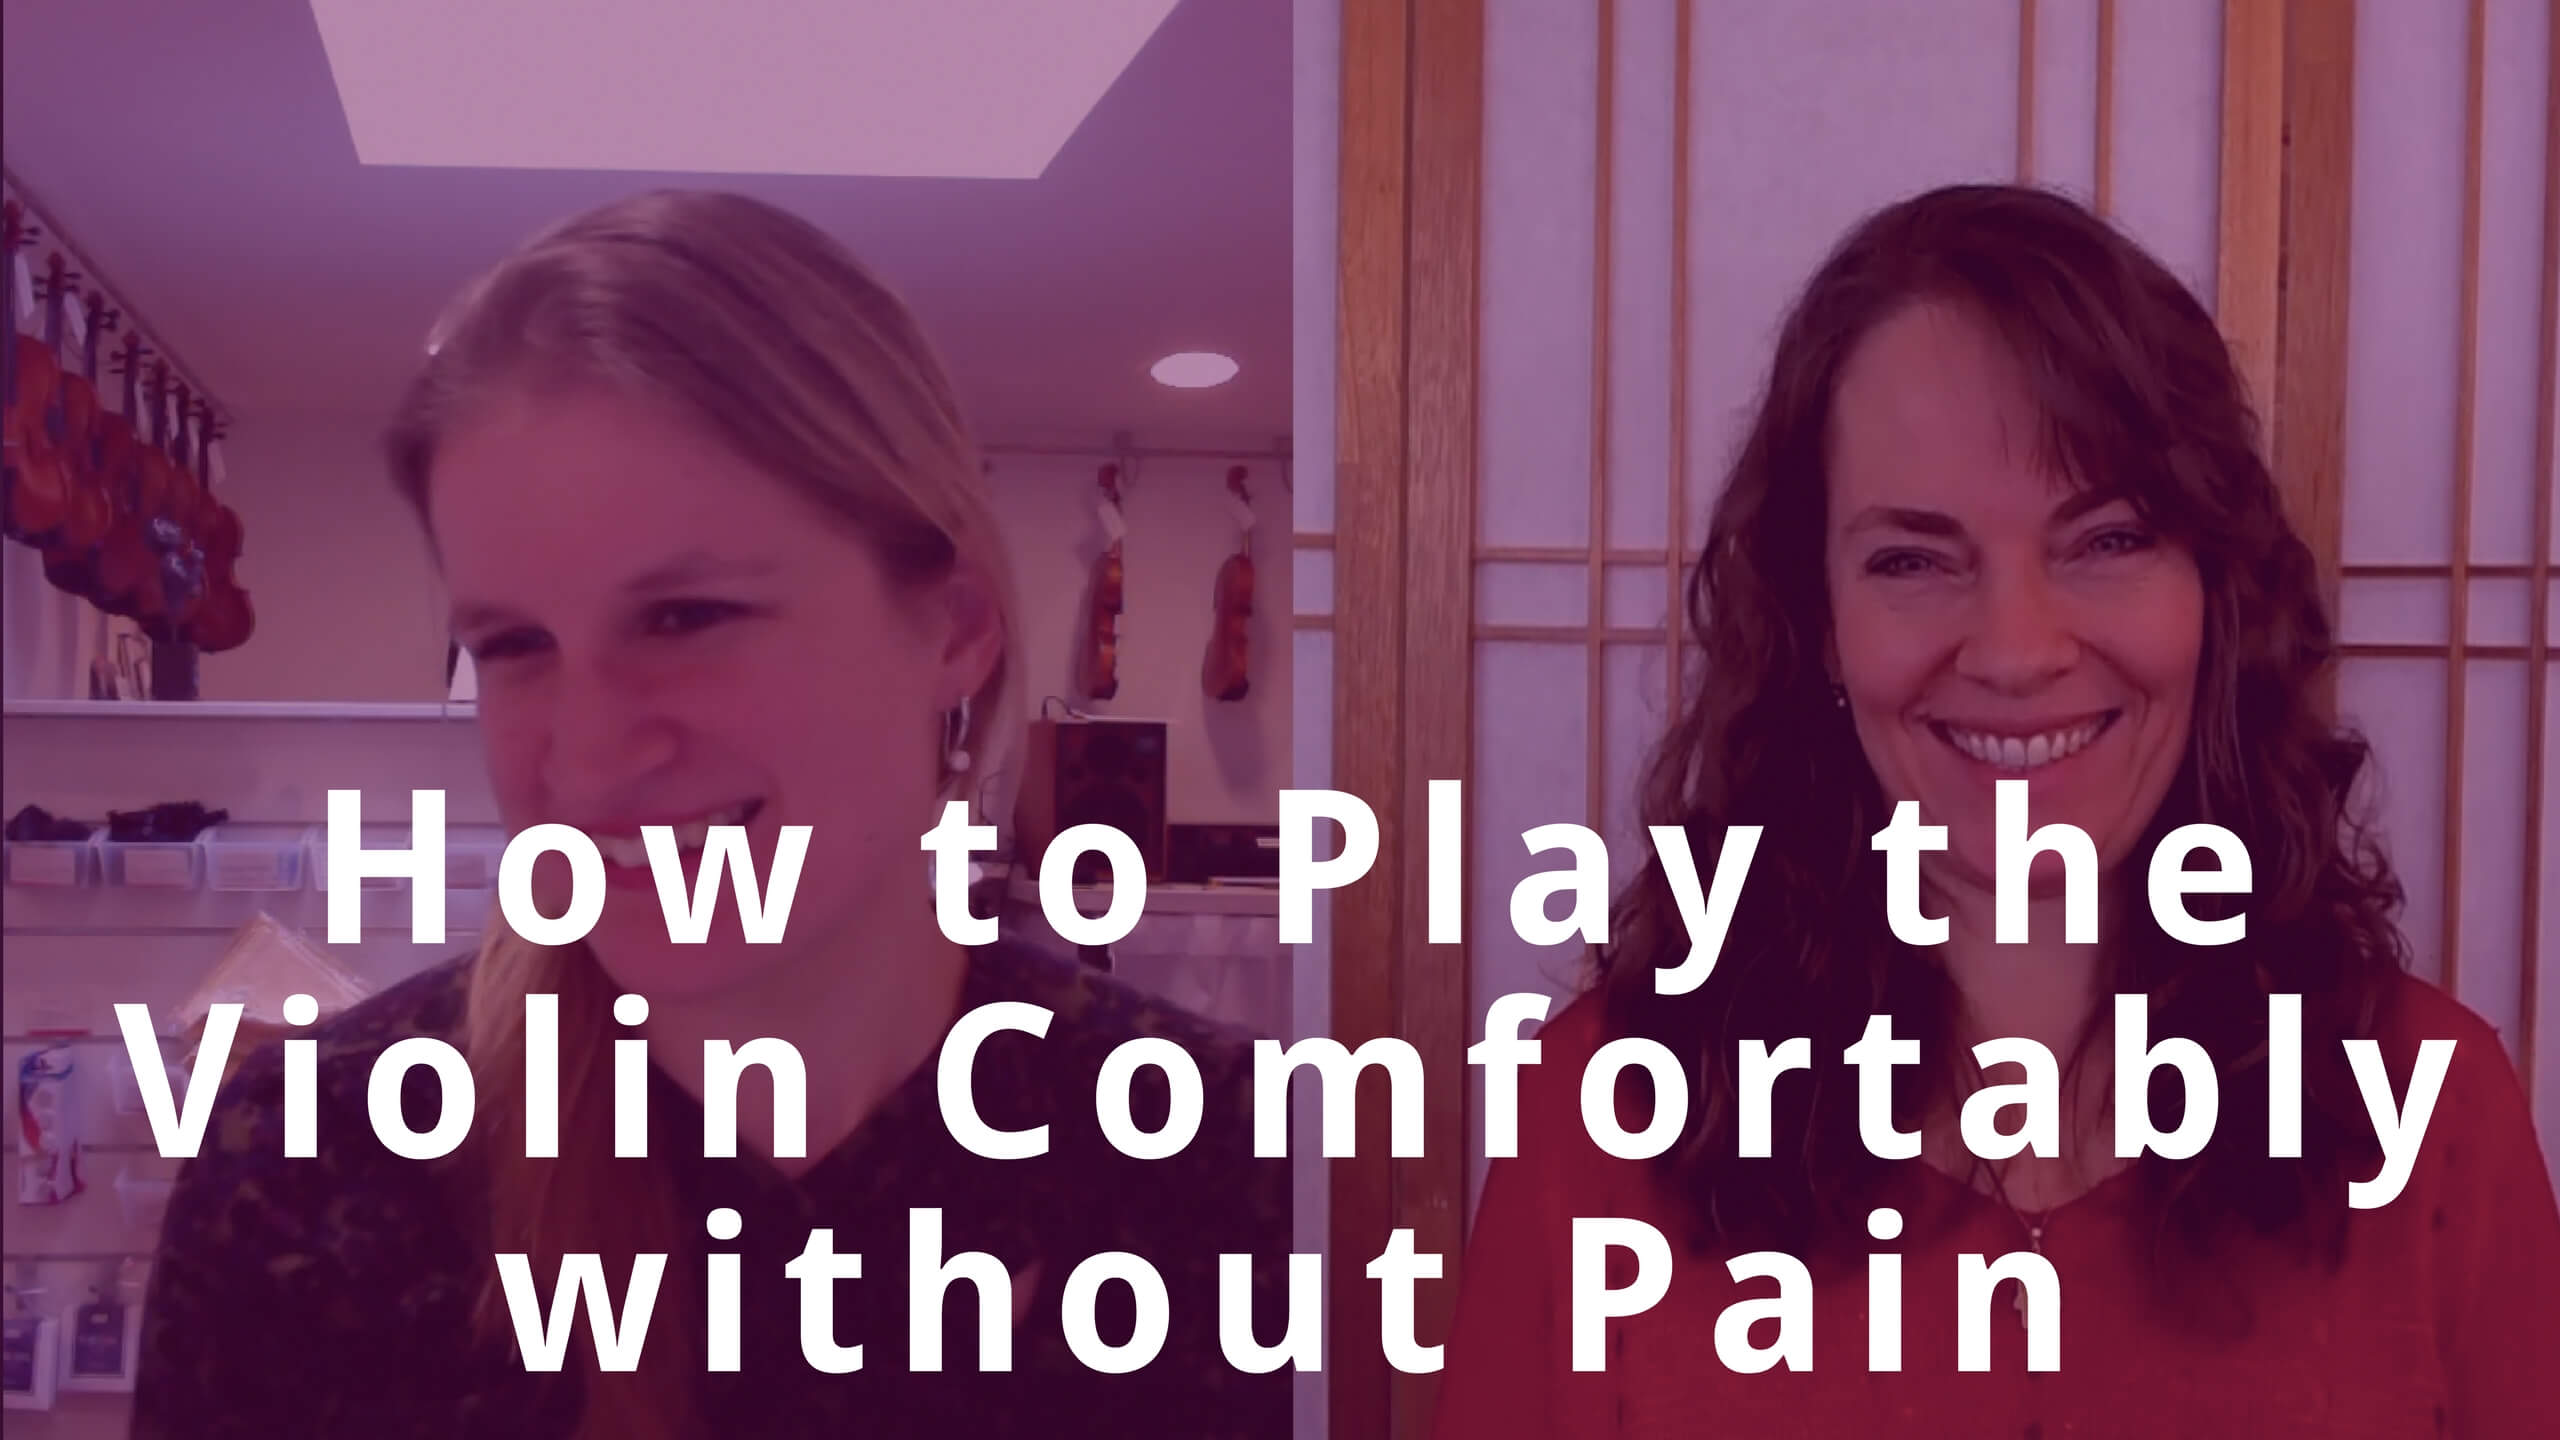 How to Play the Violin Comfortably without Pain